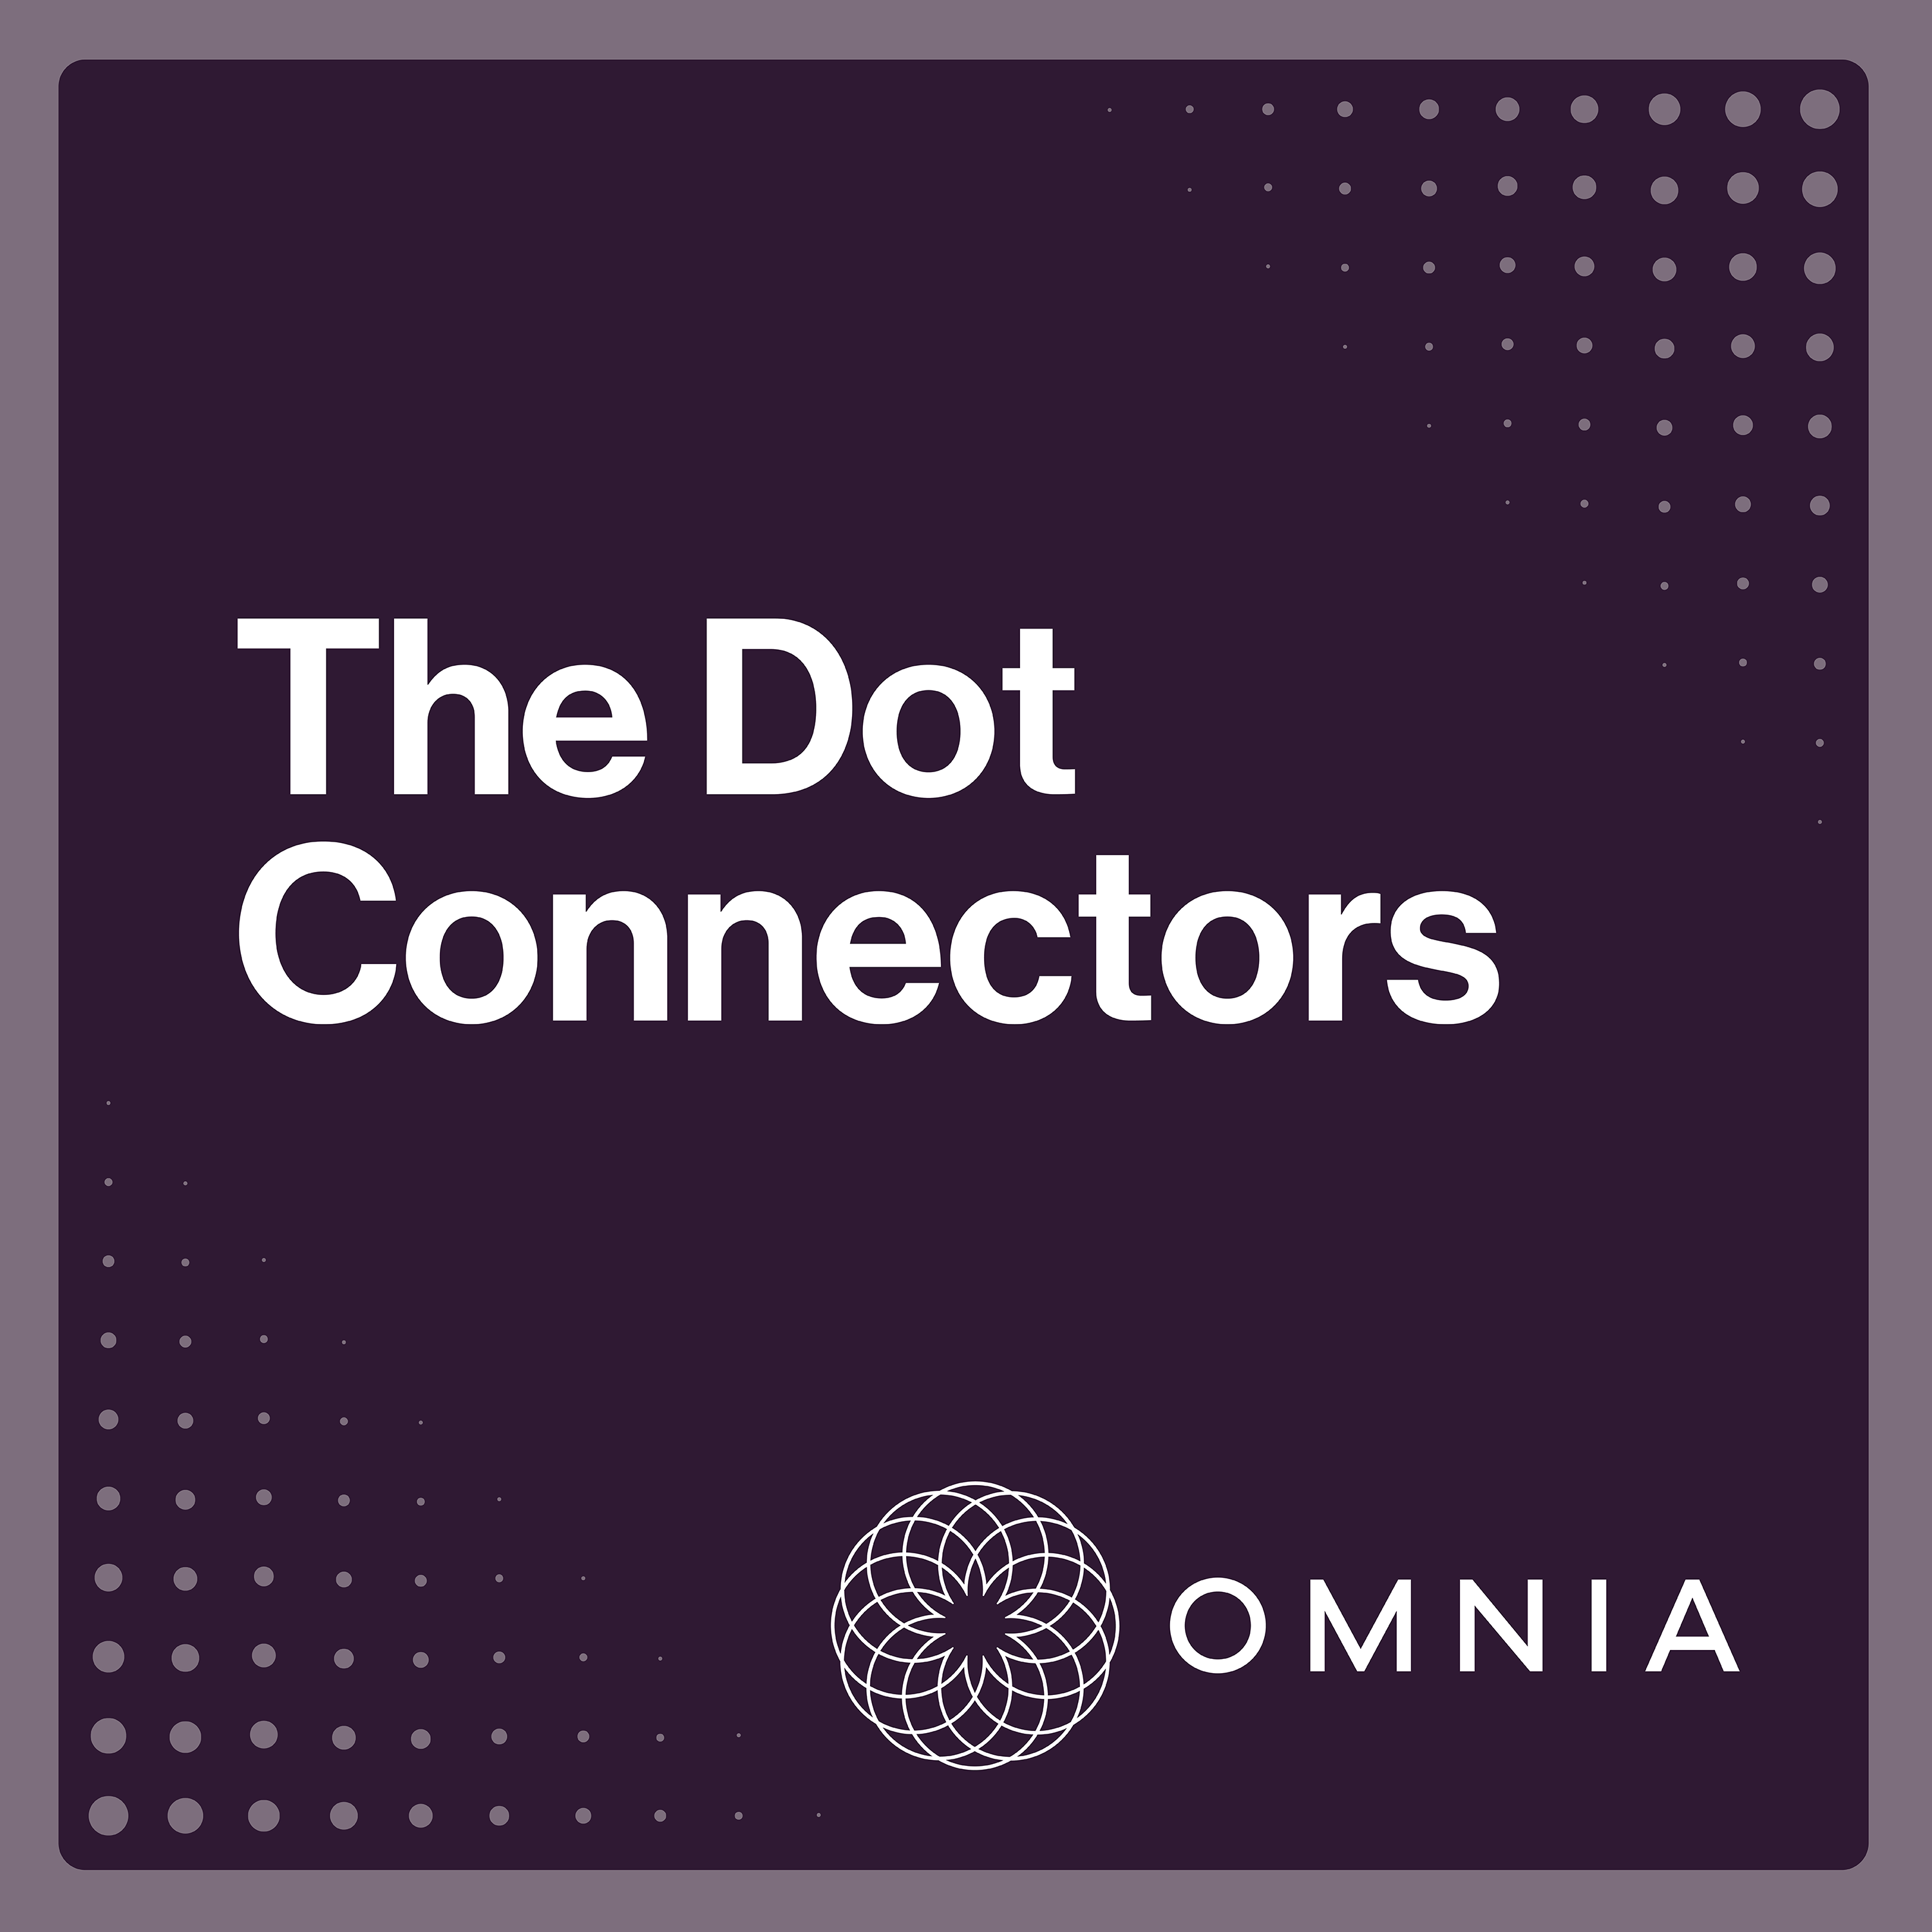 The Dot Connectors meet: James Findlay – VP of Investment & Finance at OMNIA Global